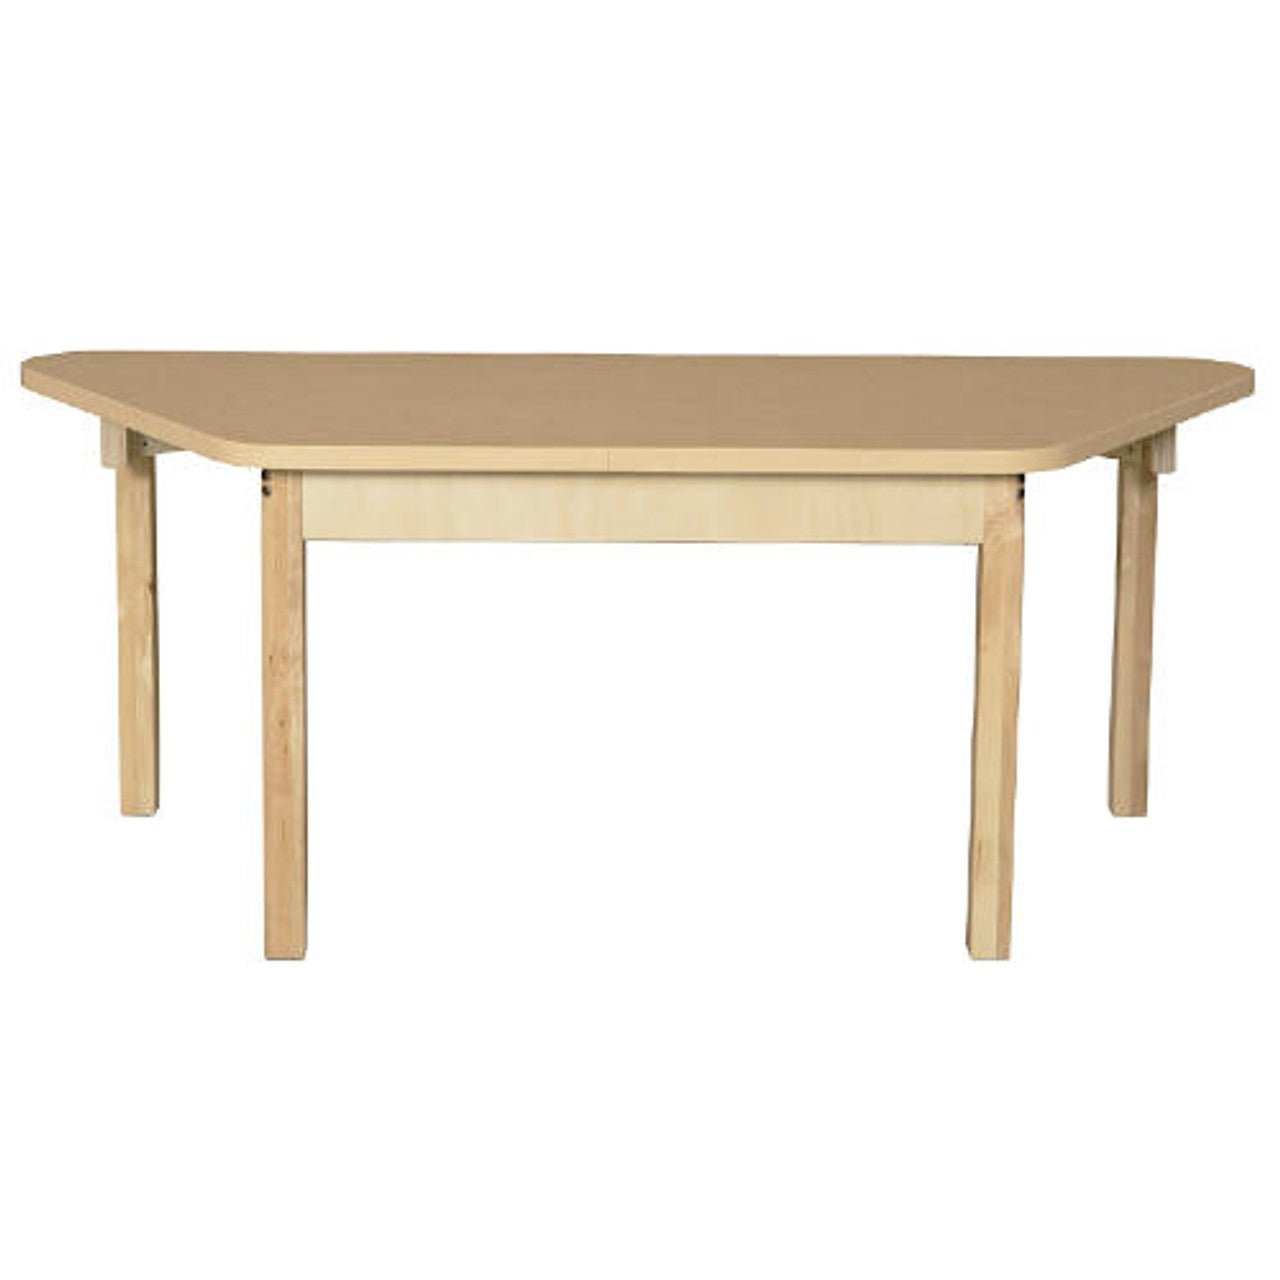 Trapezoidal High Pressure Laminate Table with Hardwood Legs- 20"